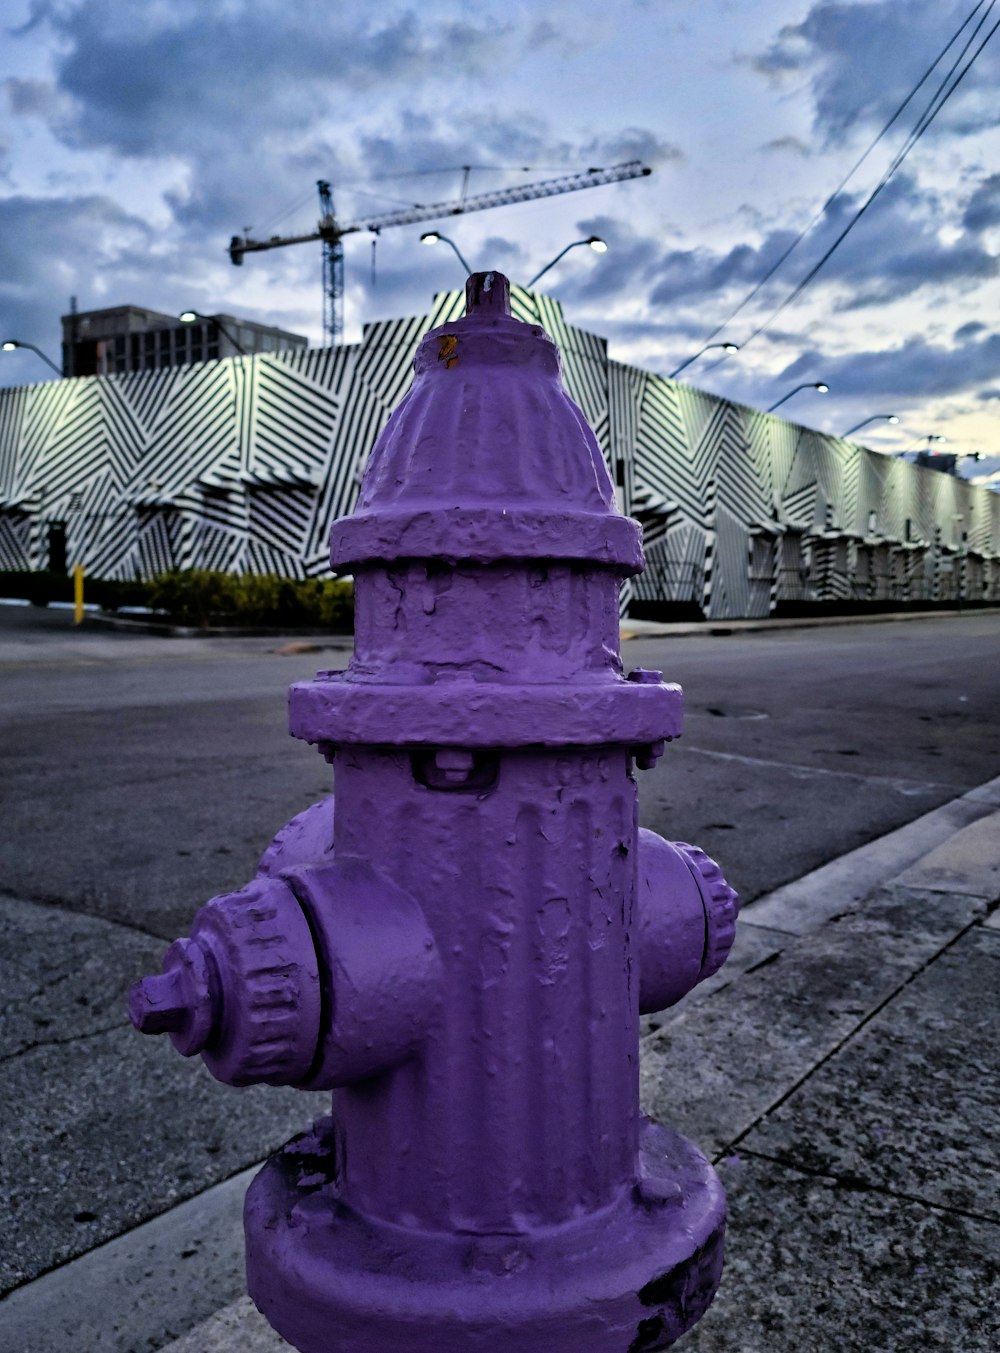 a silver fire hydrant sitting on the side of the street